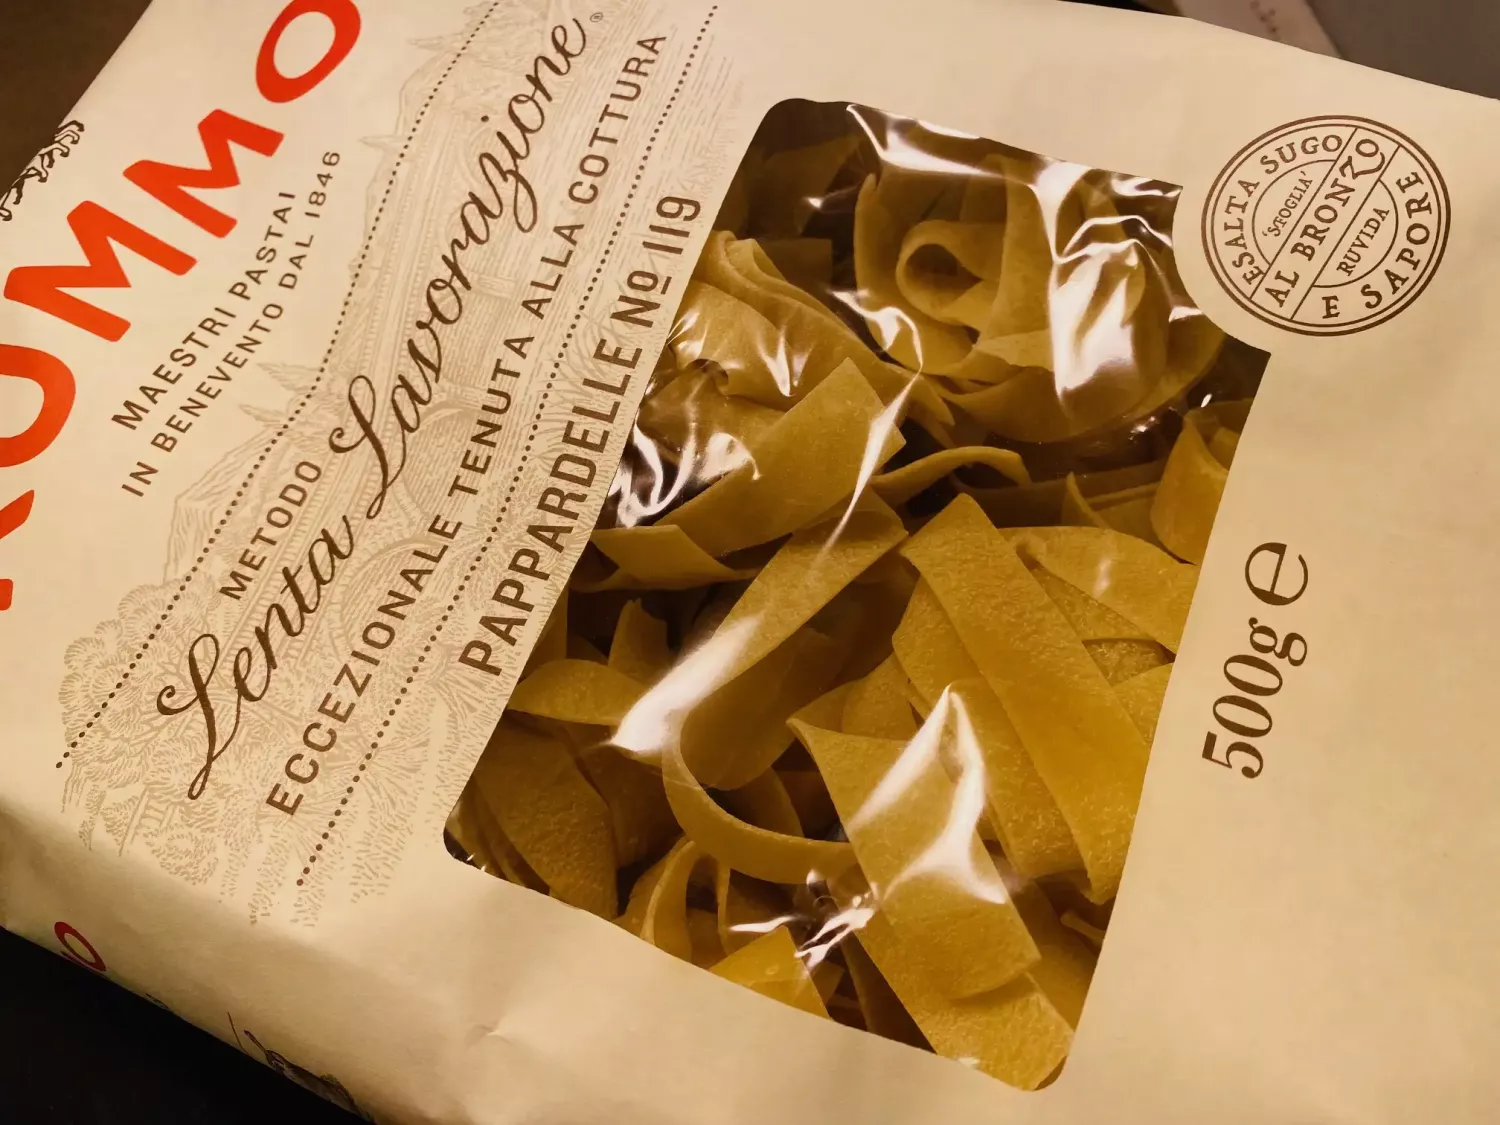 Rummo Pappardelle No 119 (500 g)